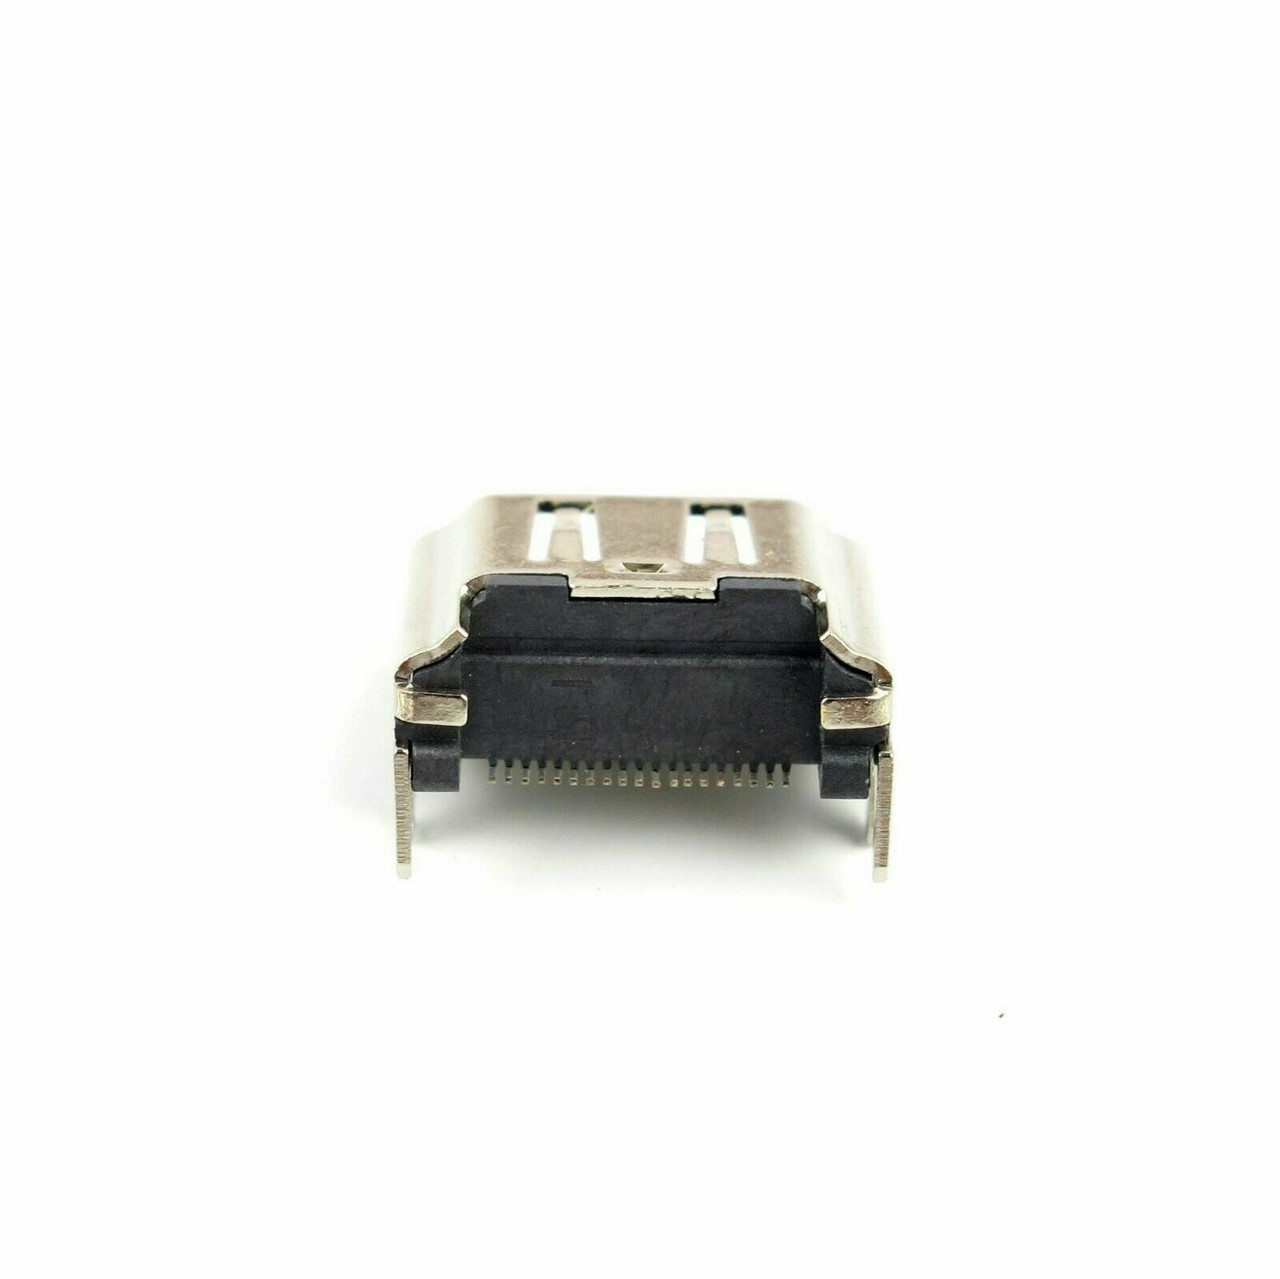 OEM HDMI Port Socket Interface Connector For Sony PlayStation 4 PS4 Motherboard